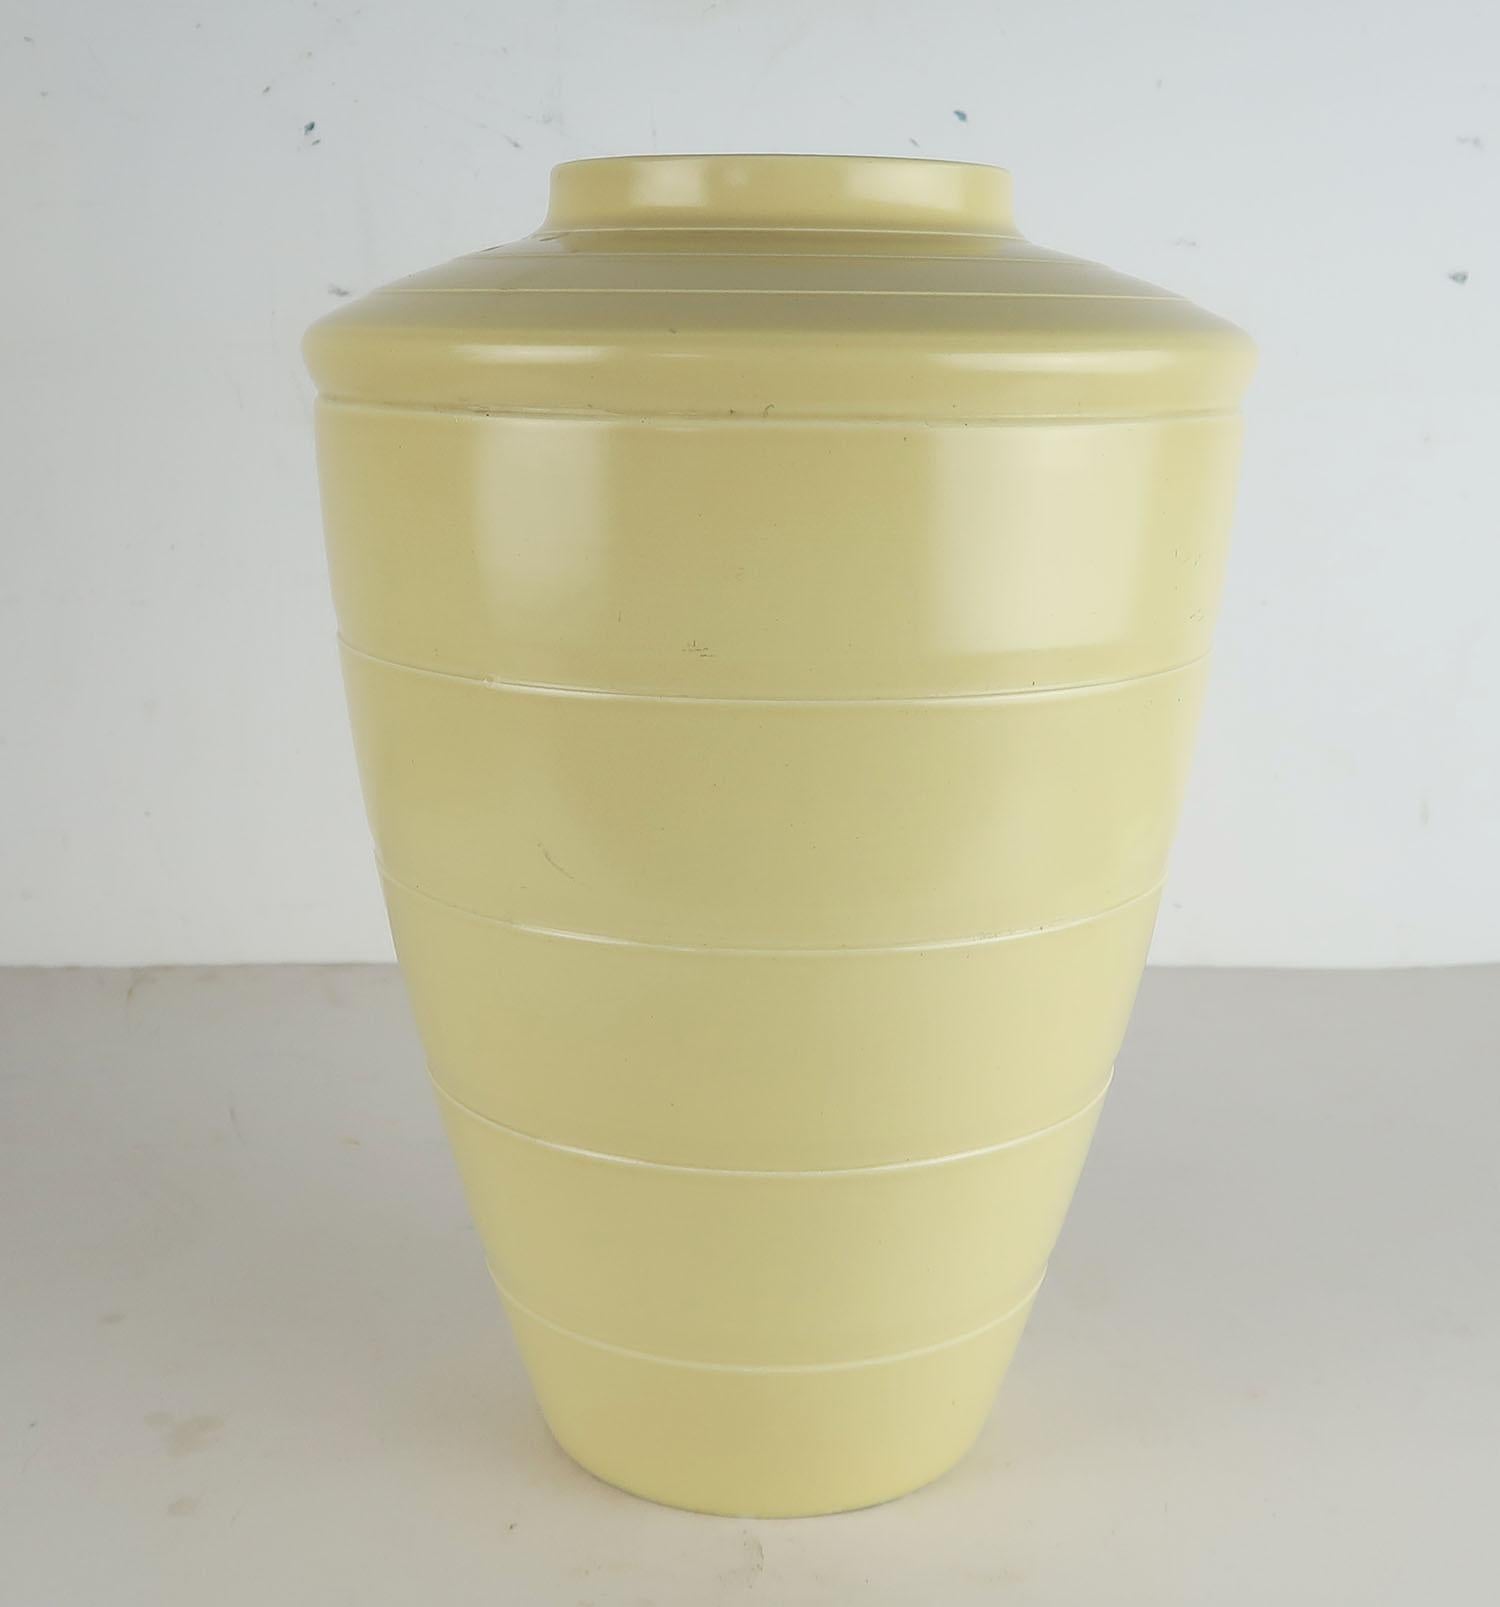 Lovely shaped and good size cream / pale yellow ceramic vase made by Wedgwood.

Designed by Keith Murray

Makers marks and facsimile signature on base

Tiny imperfection to the rim of the base.



